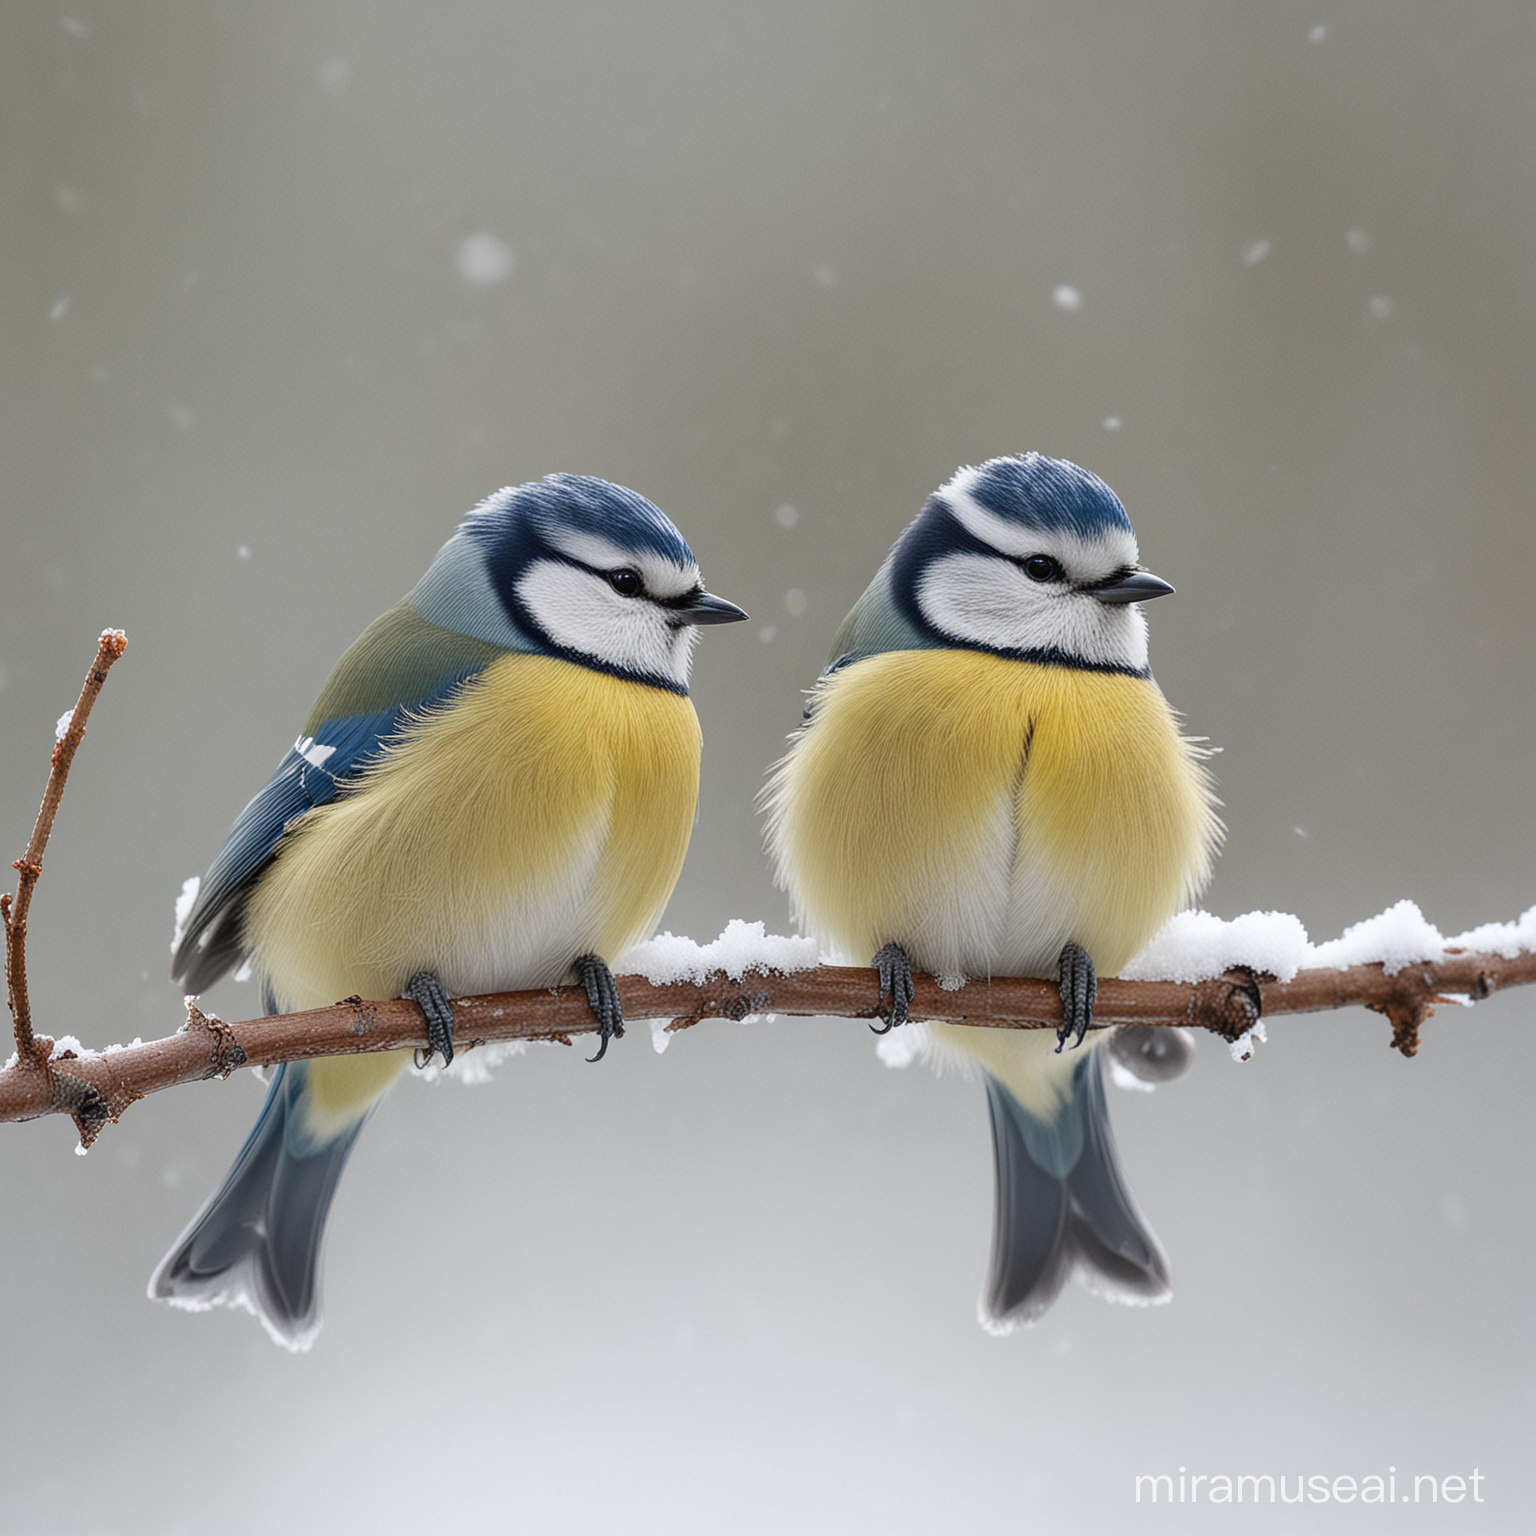 Blue Tits Perched on Snowy Branch in Finnish Spring